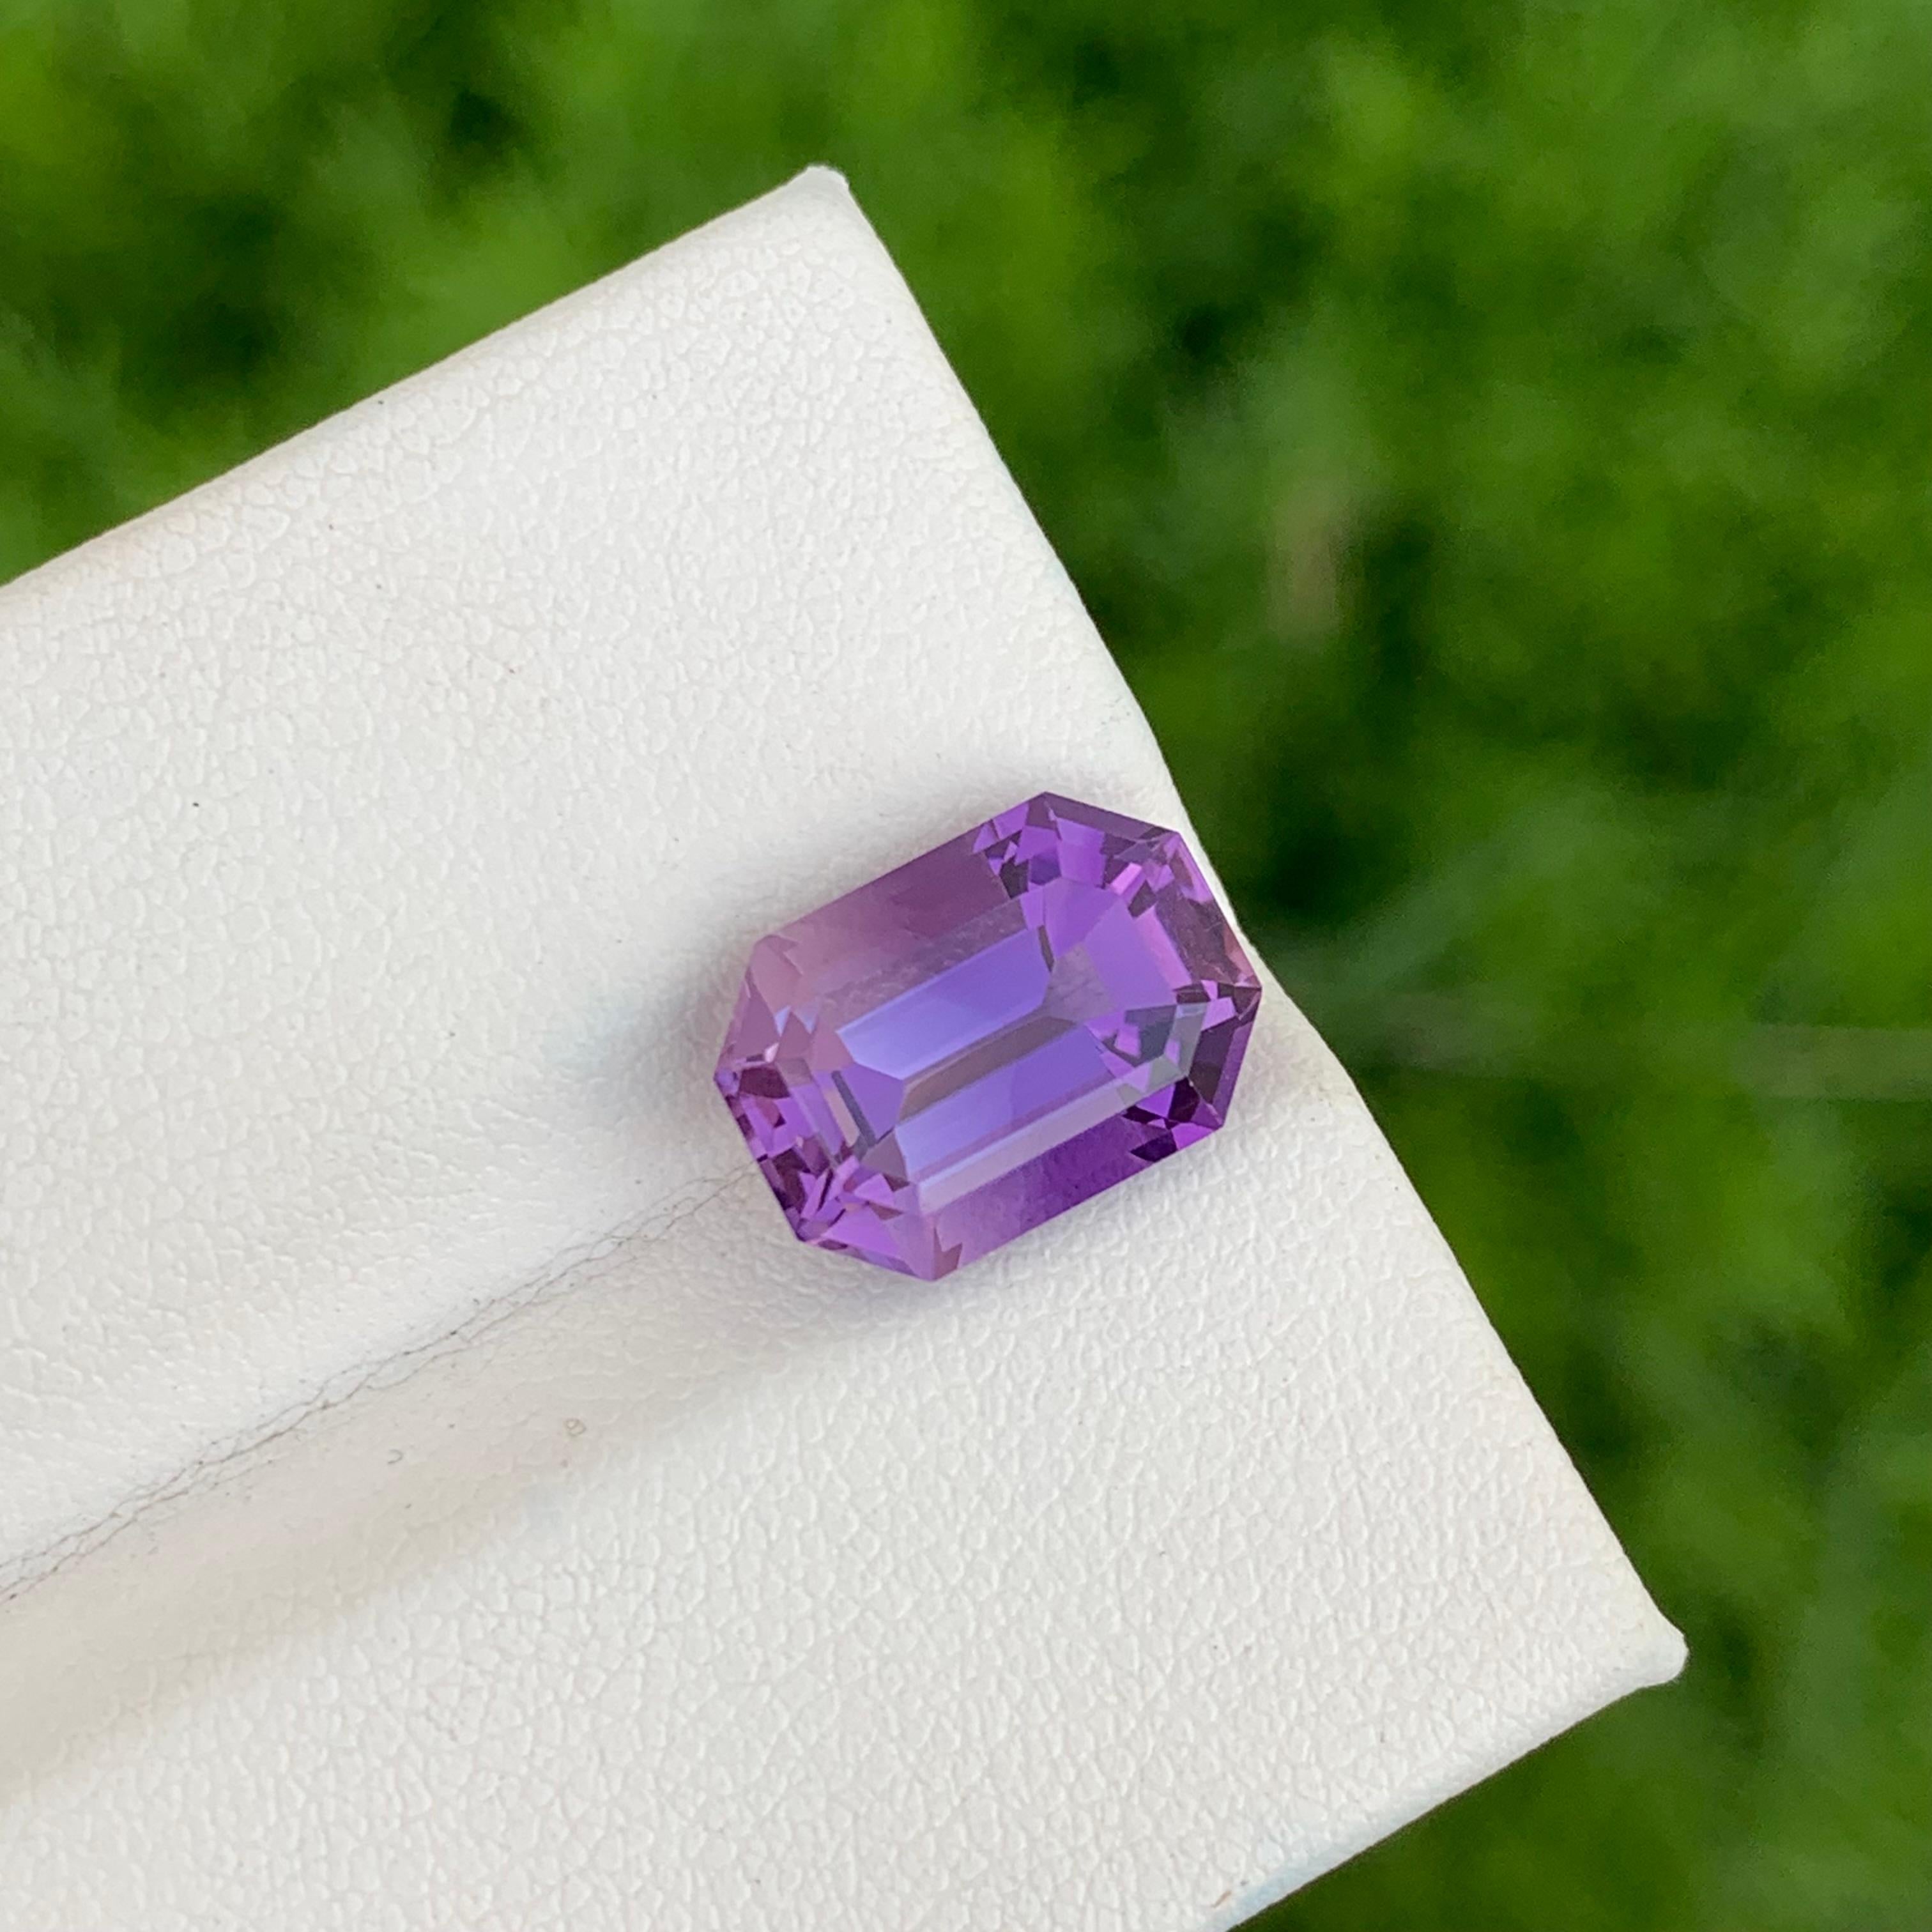 5.60 Carats Stunning Loose Purple Amethyst Gem From Brazil Mine February Stone For Sale 6